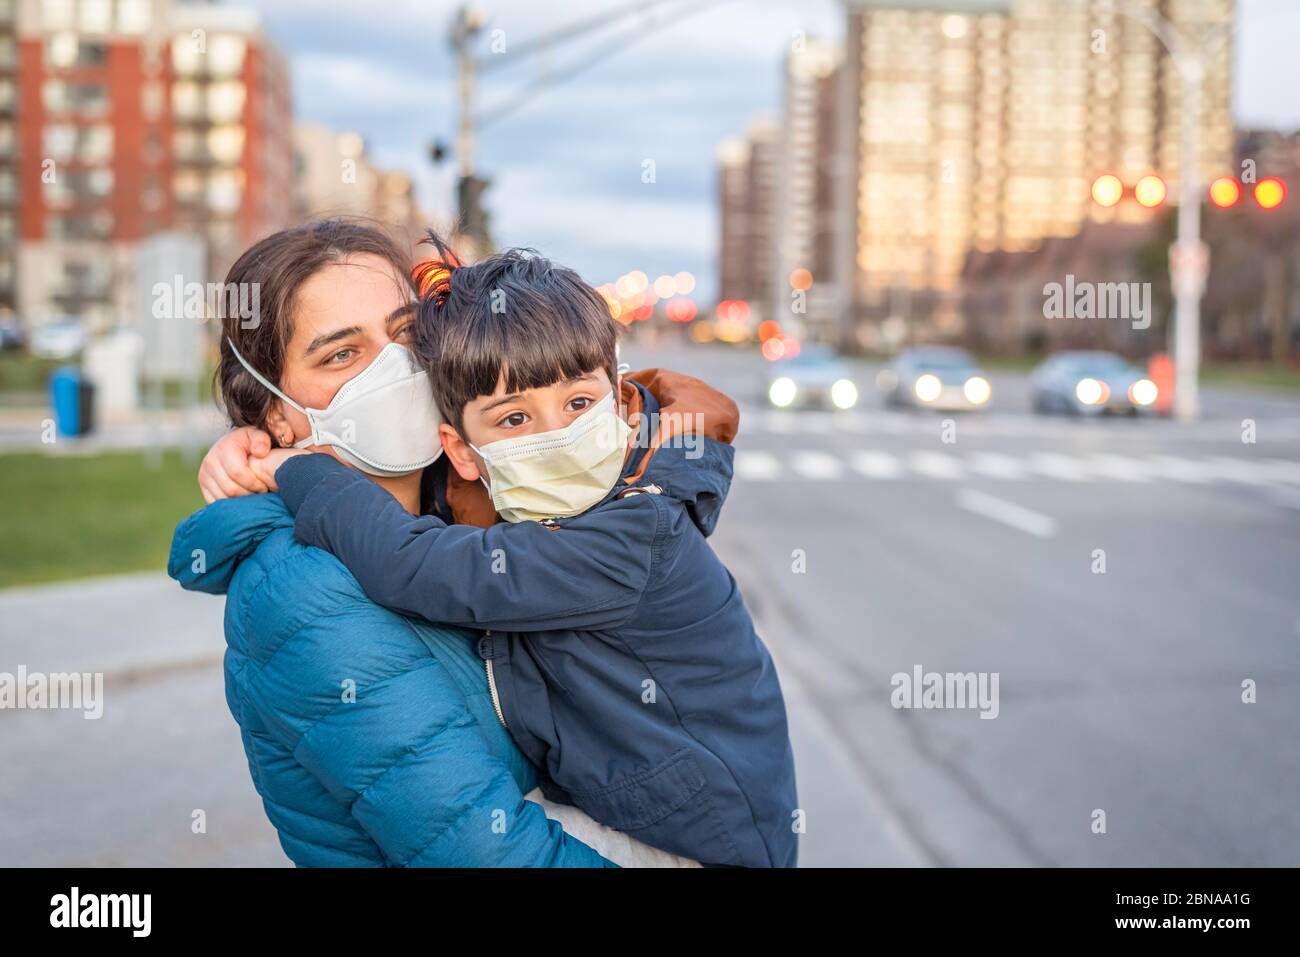 Novel coronavirus COVID-19 changed our life in society, mother and son going out to play ground wearing face mask Stock Photo